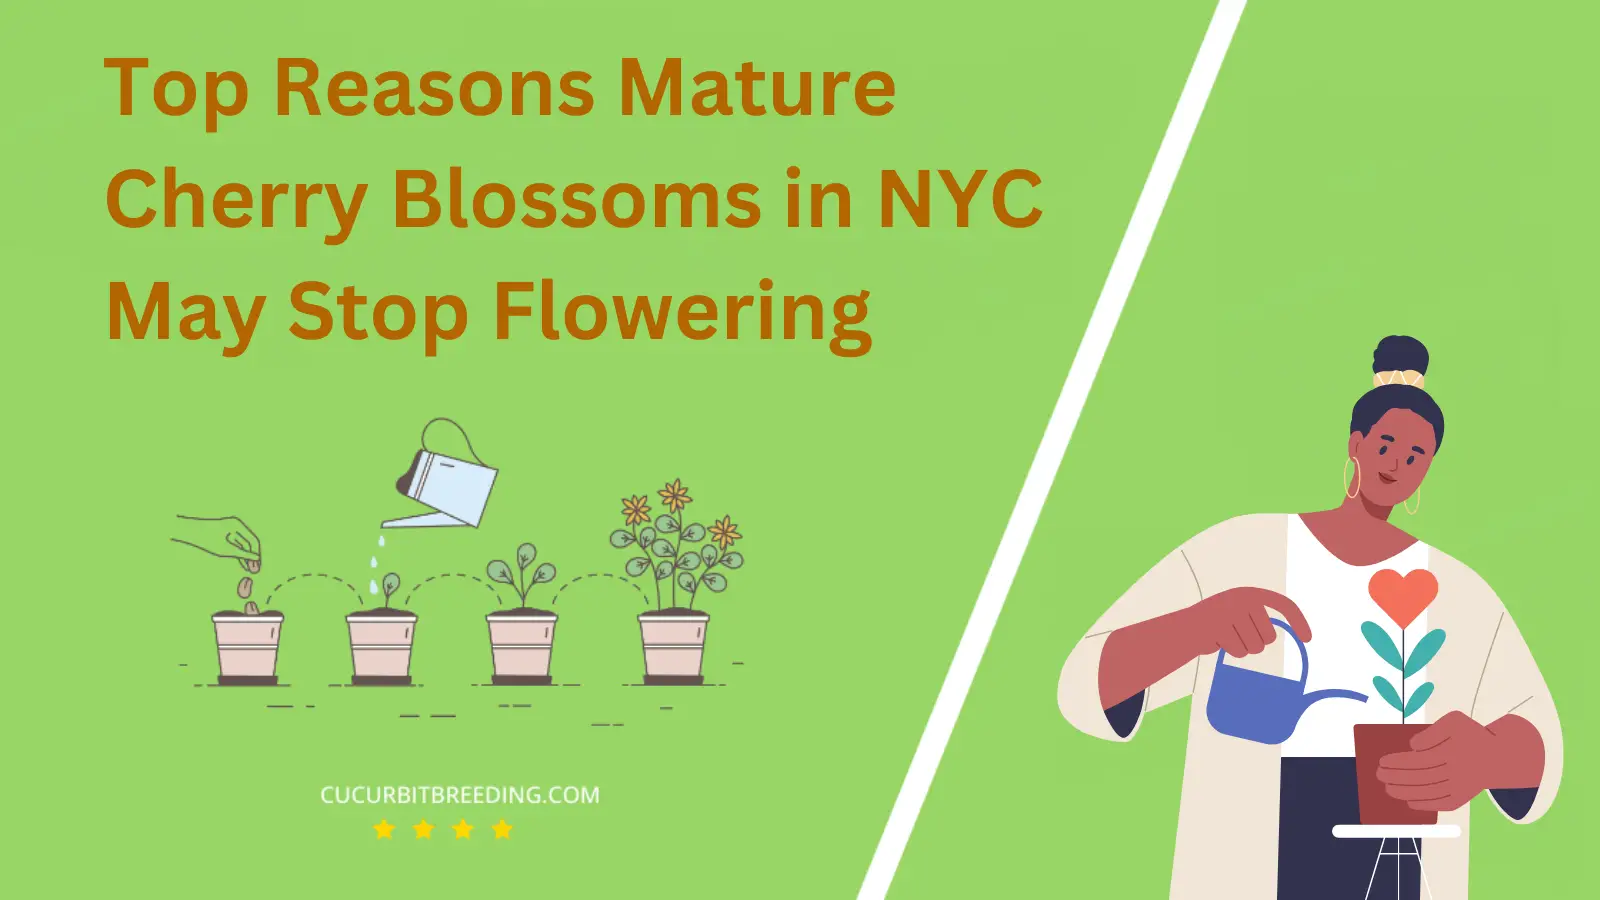 Top Reasons Mature Cherry Blossoms in NYC May Stop Flowering